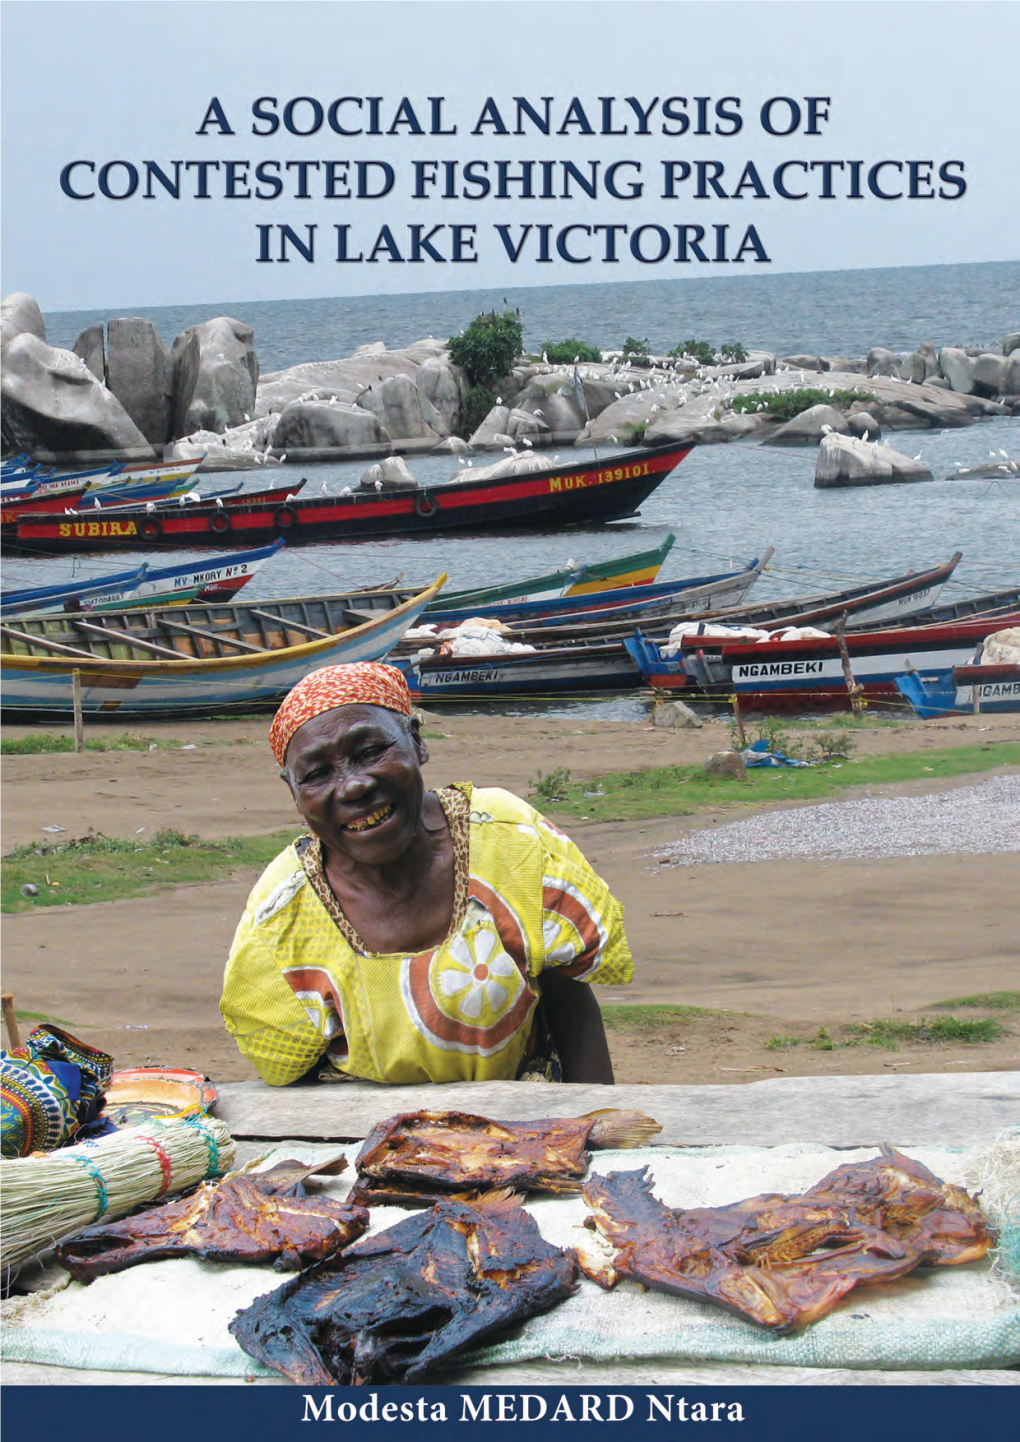 A Social Analysis of Contested Fishing Practices in Lake Victoria, Tanzania”